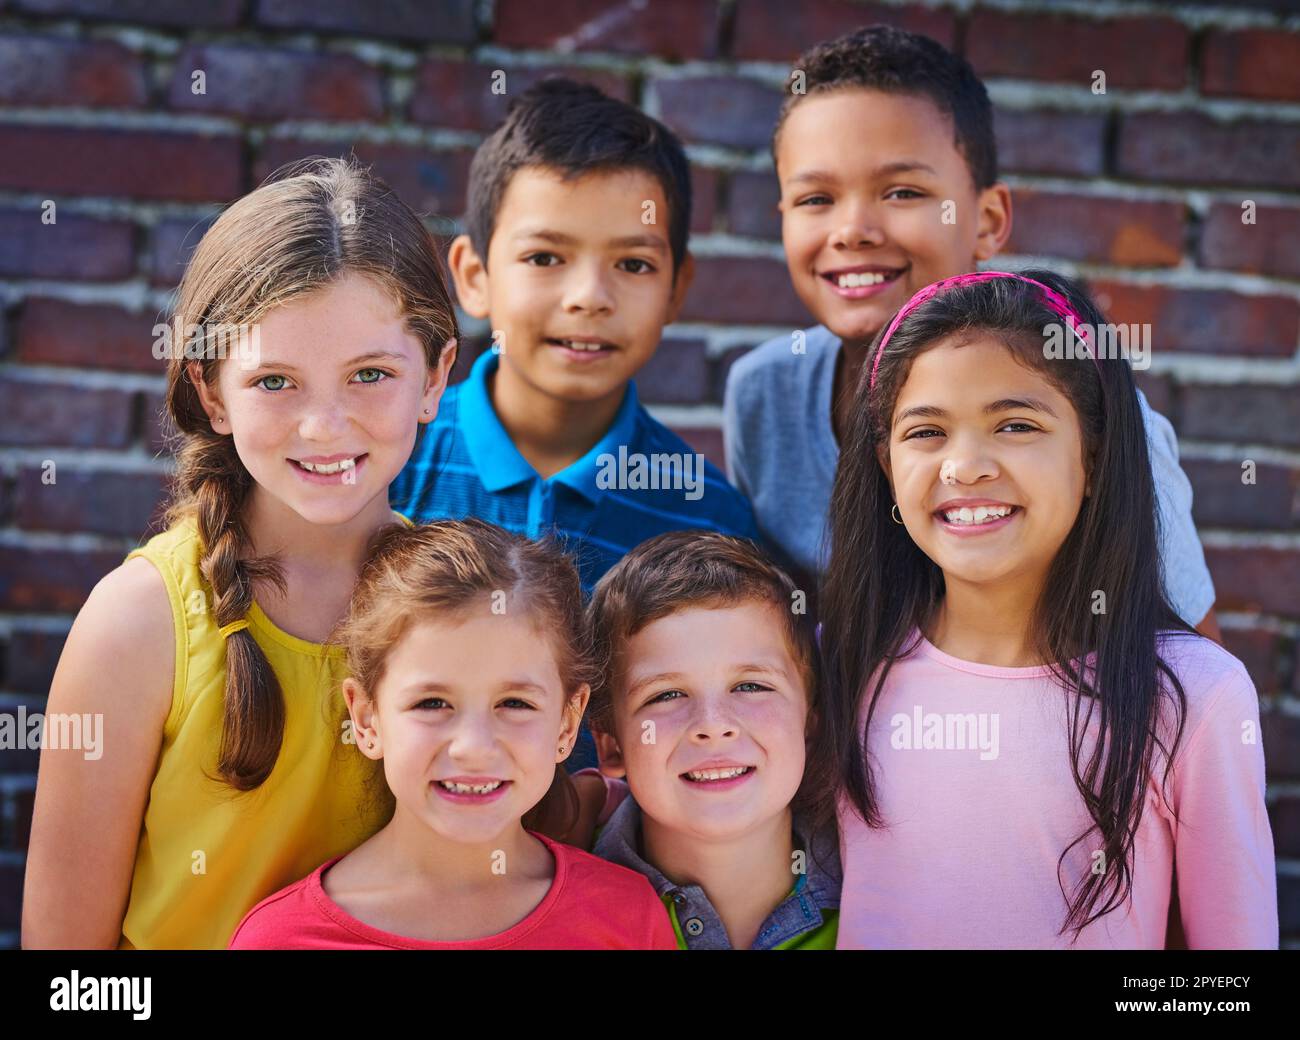 The new leaders of the future. Portrait of a diverse group of children outside. Stock Photo